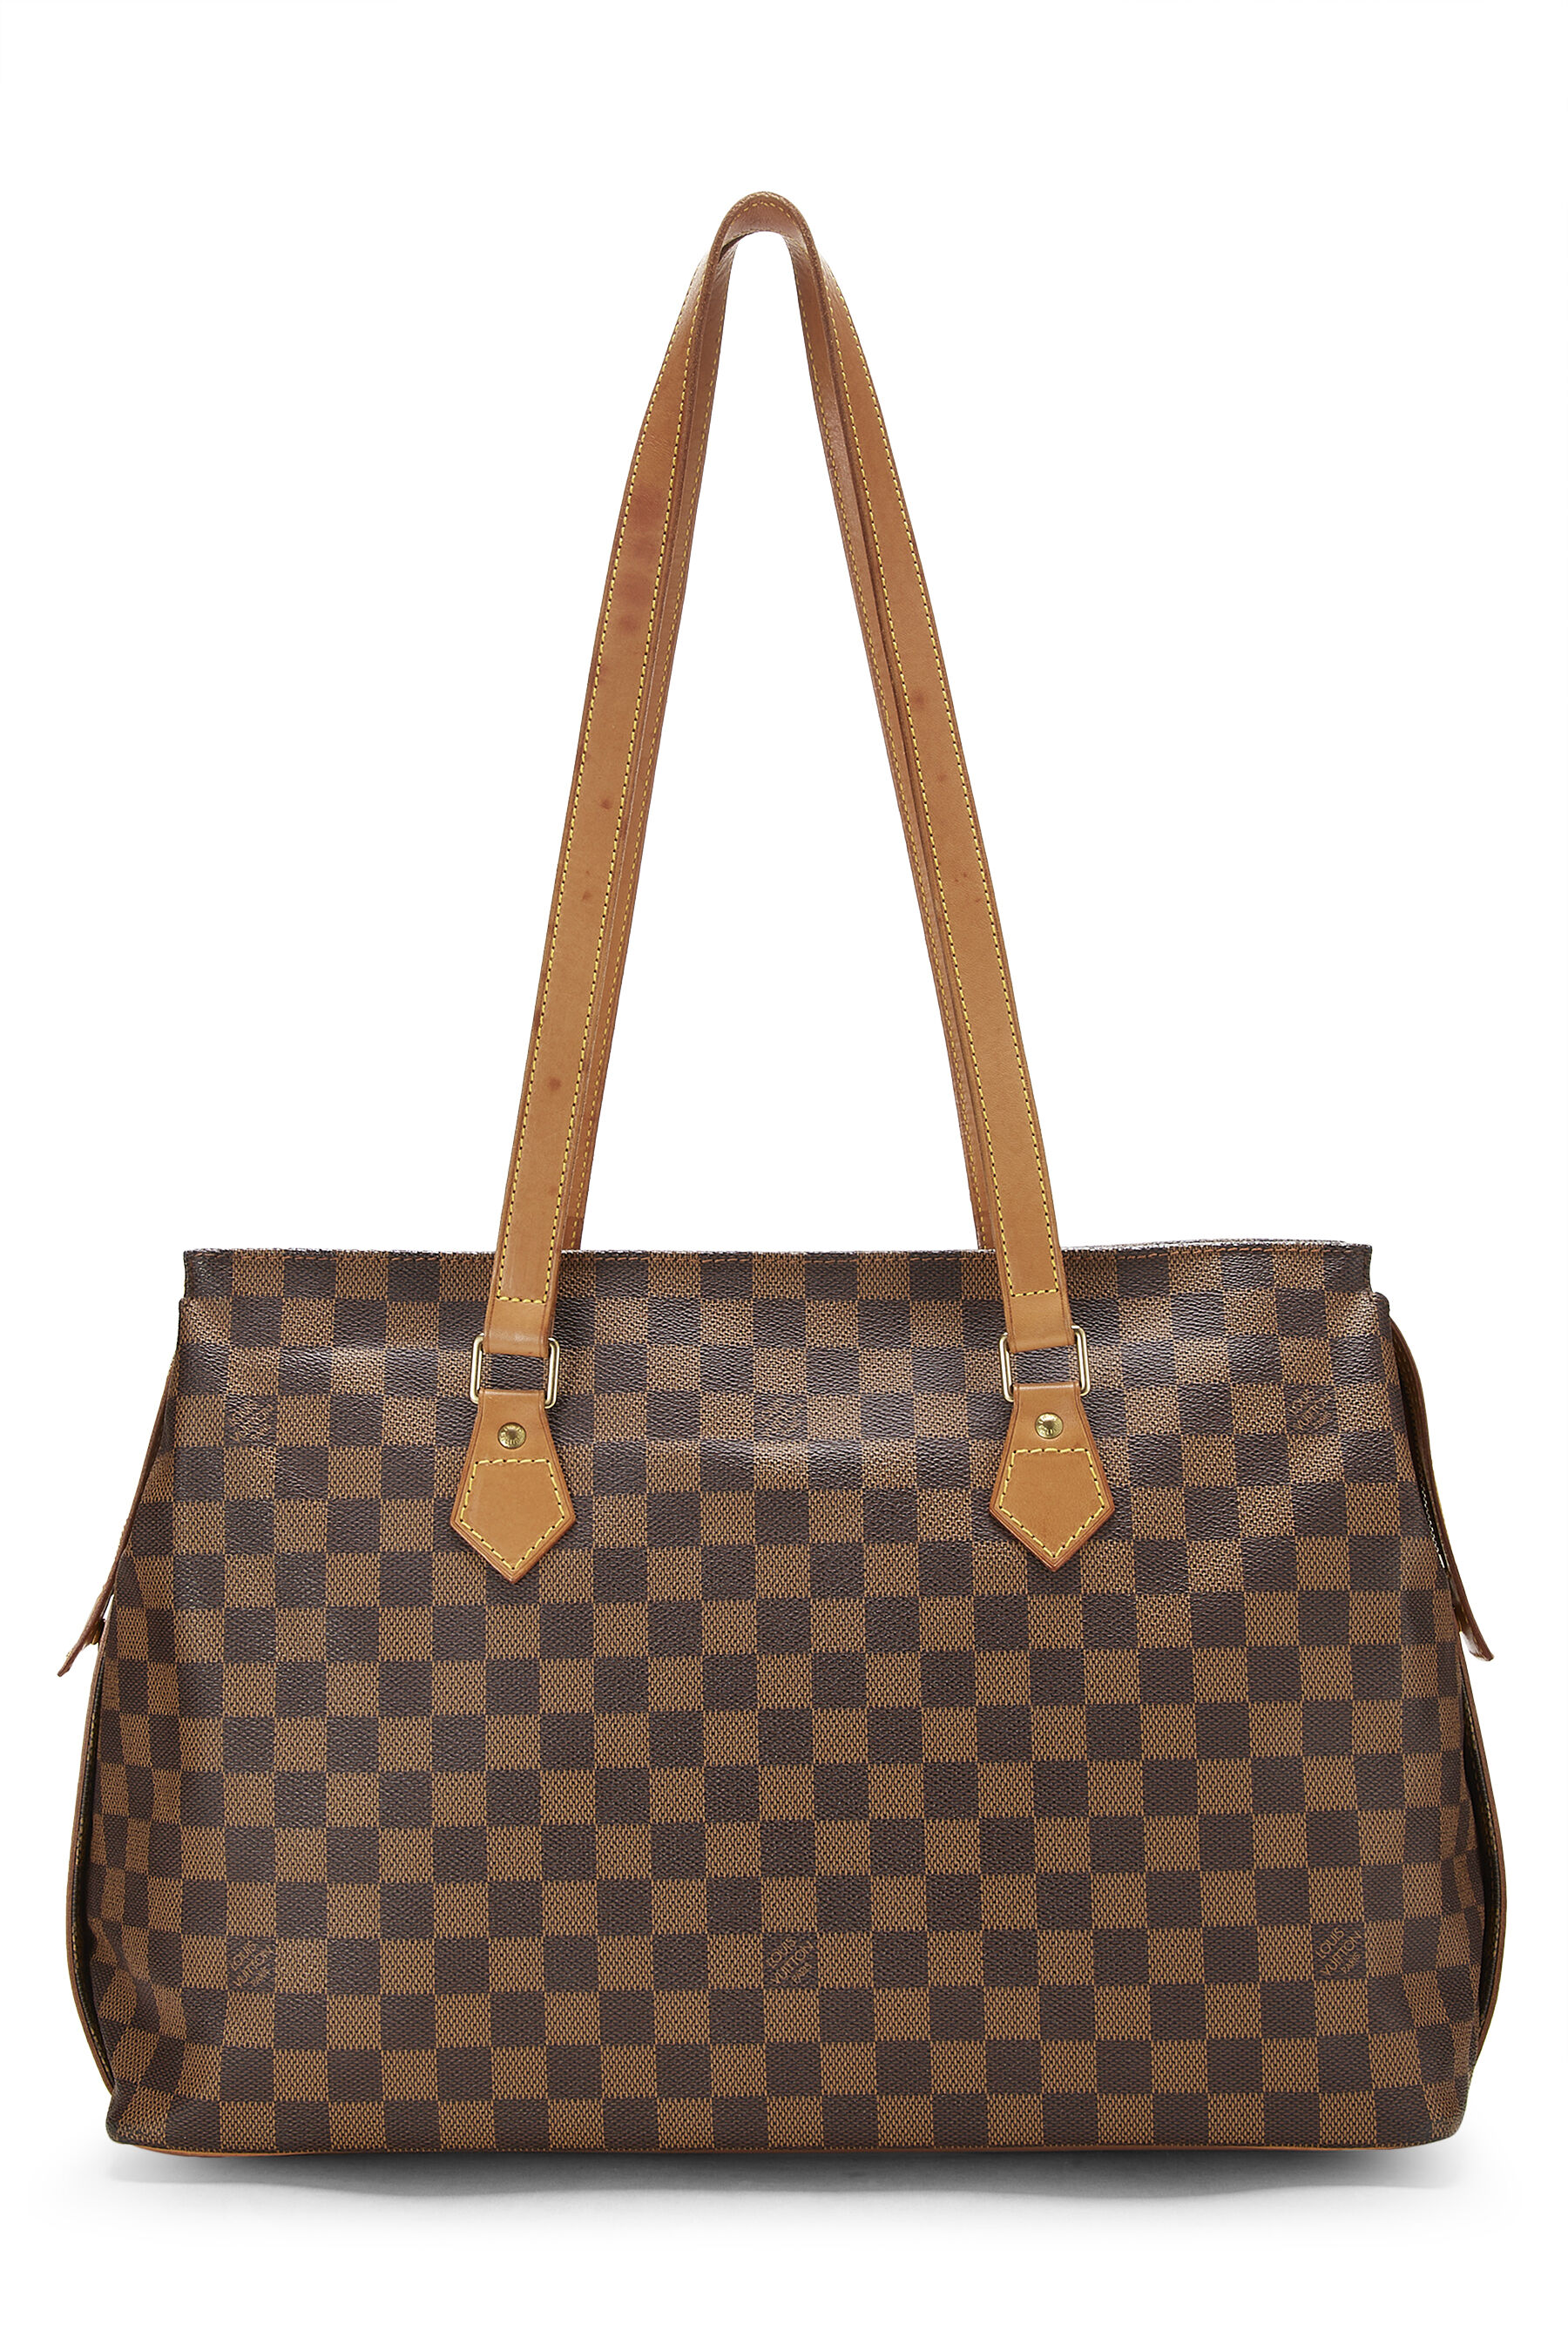 Louis Vuitton 200th Anniversary Special Edition Canvas Tote Bag